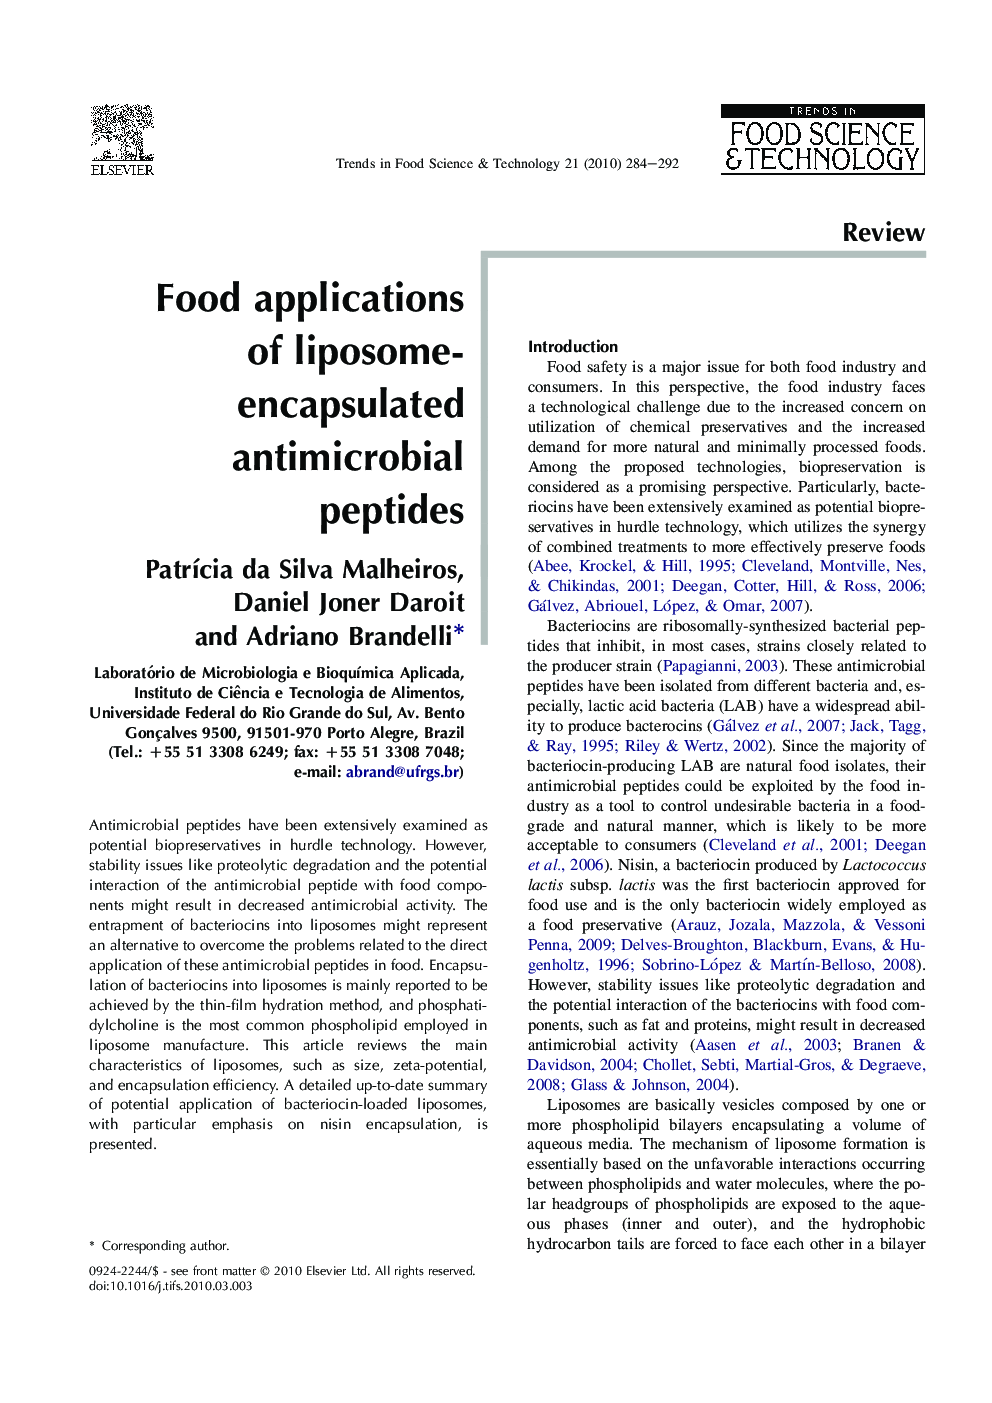 Food applications of liposome-encapsulated antimicrobial peptides